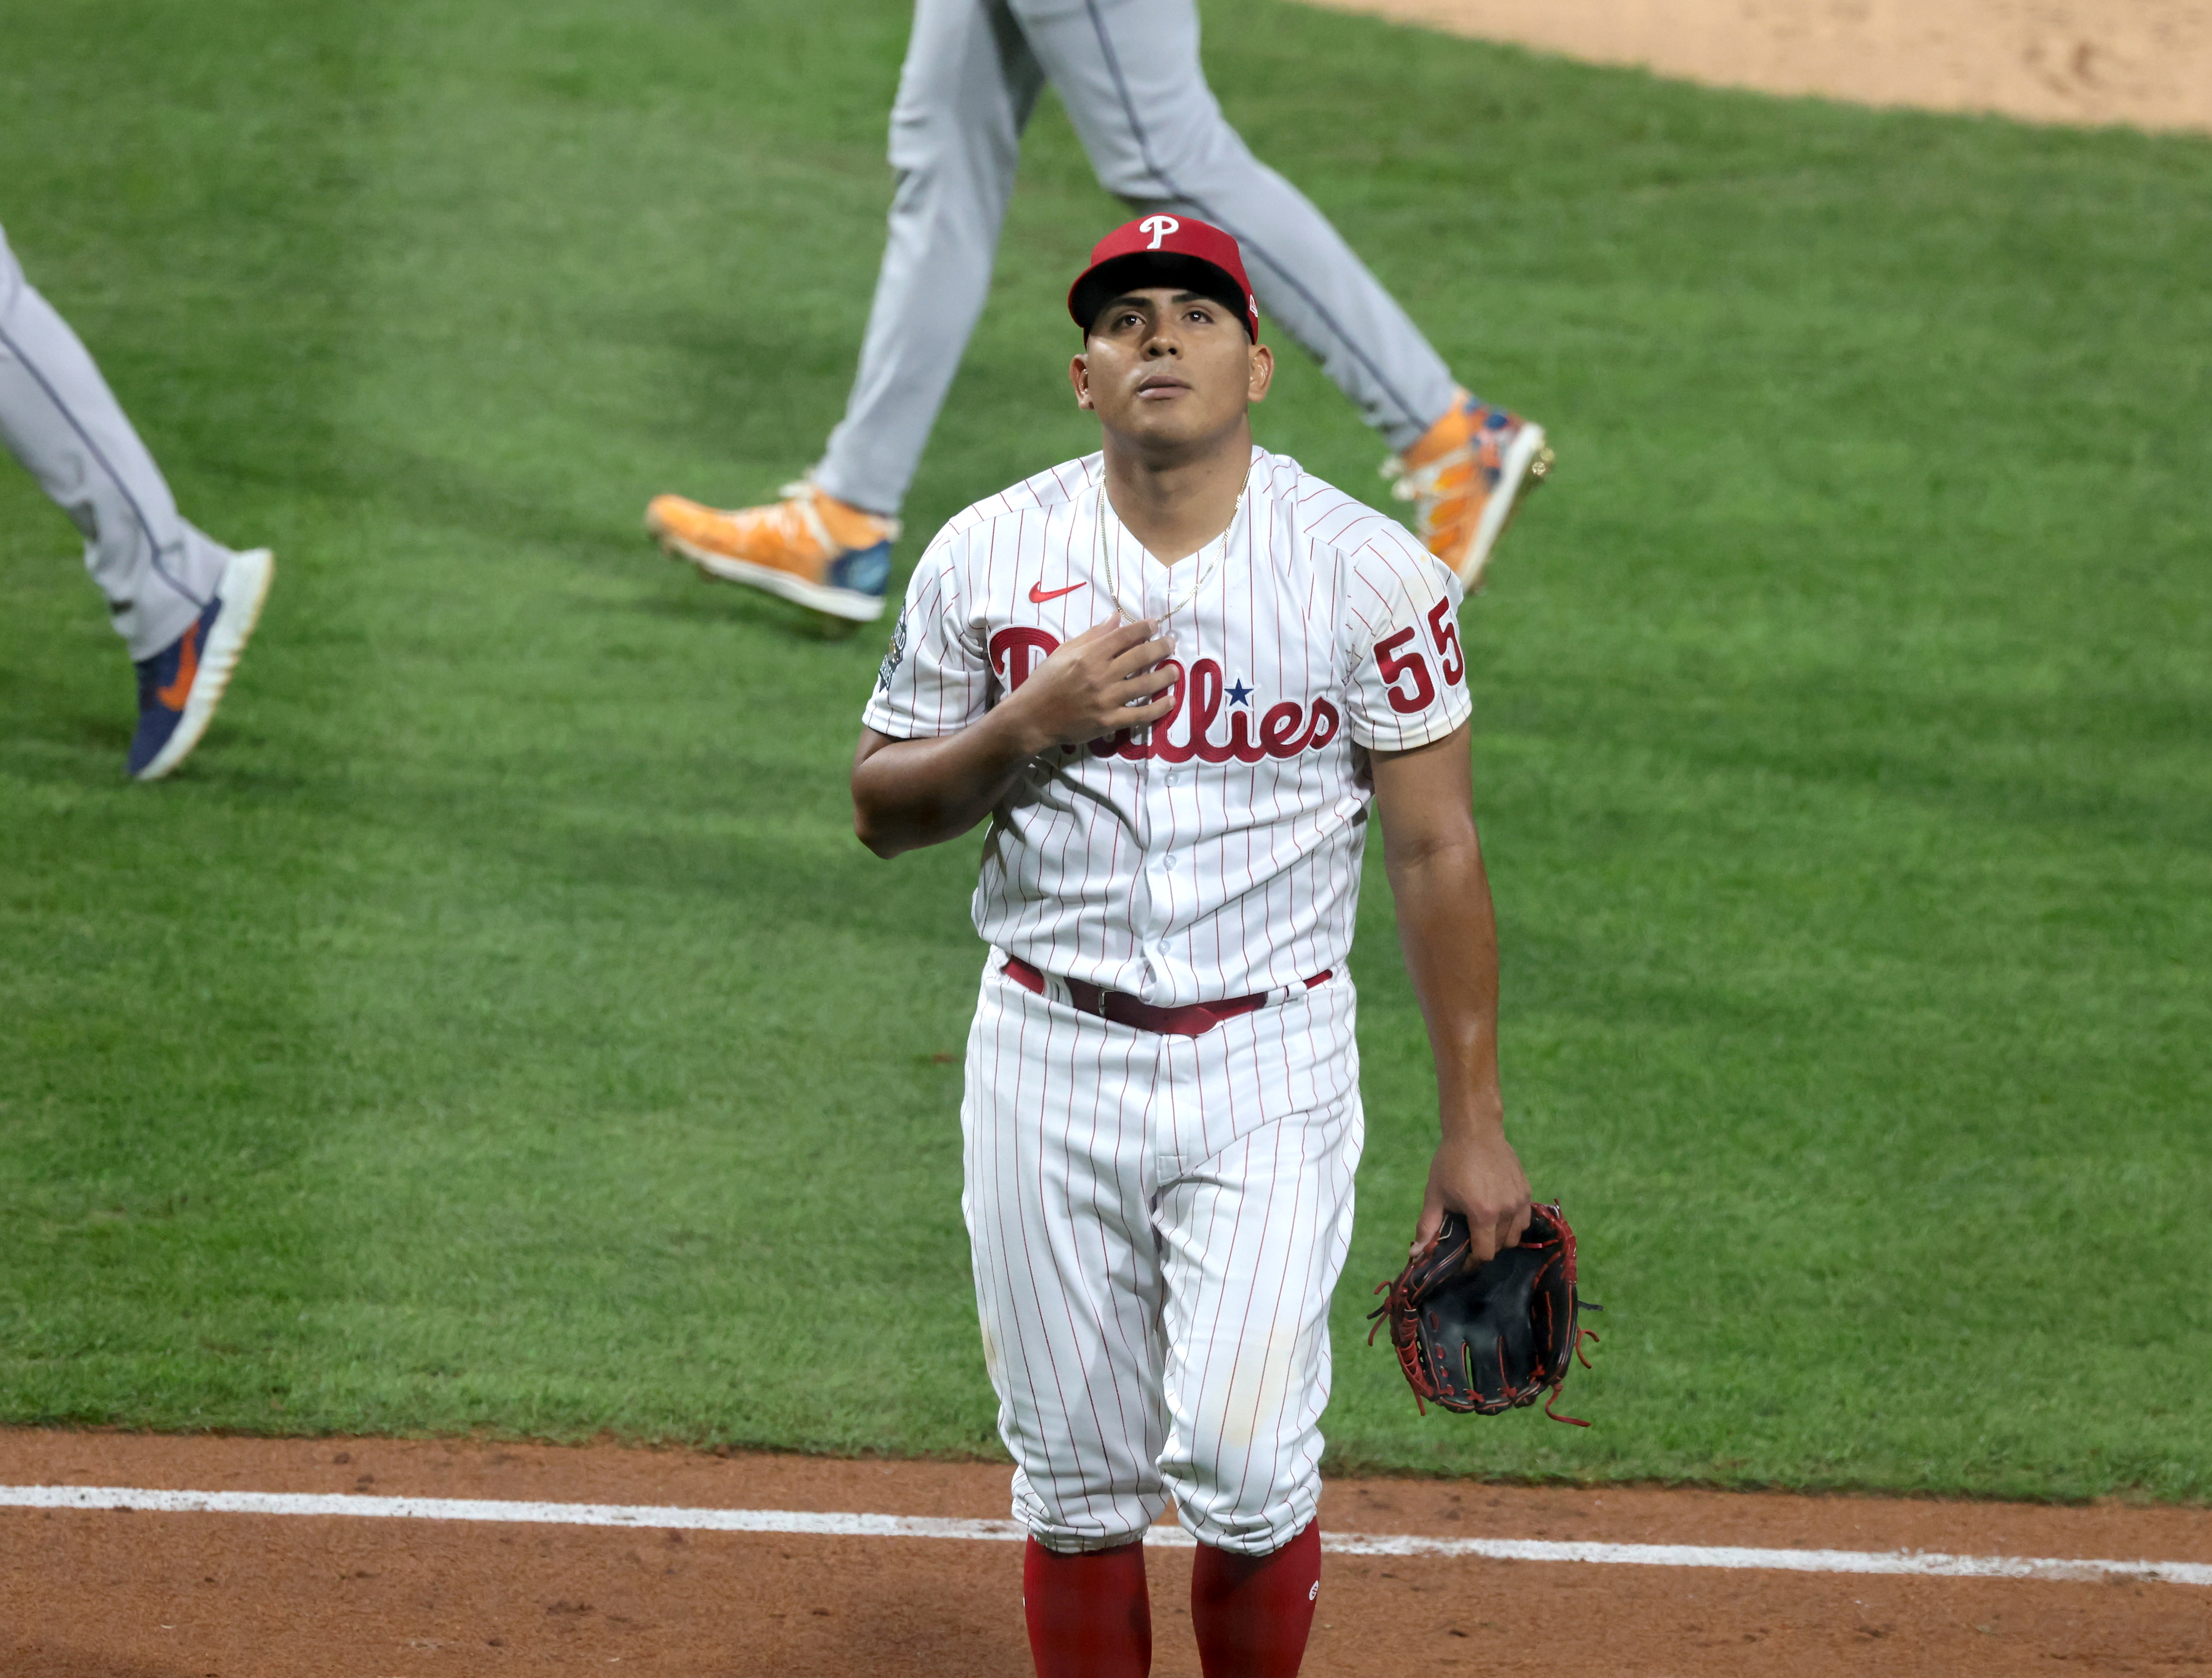 Ranger Suarez (55) of the Philadelphia Phillies walks off the field after the second inning vs. the Houston Astros during Game 3 of the World Series at Citizens Bank Park, Tuesday, Nov. 1 2022.